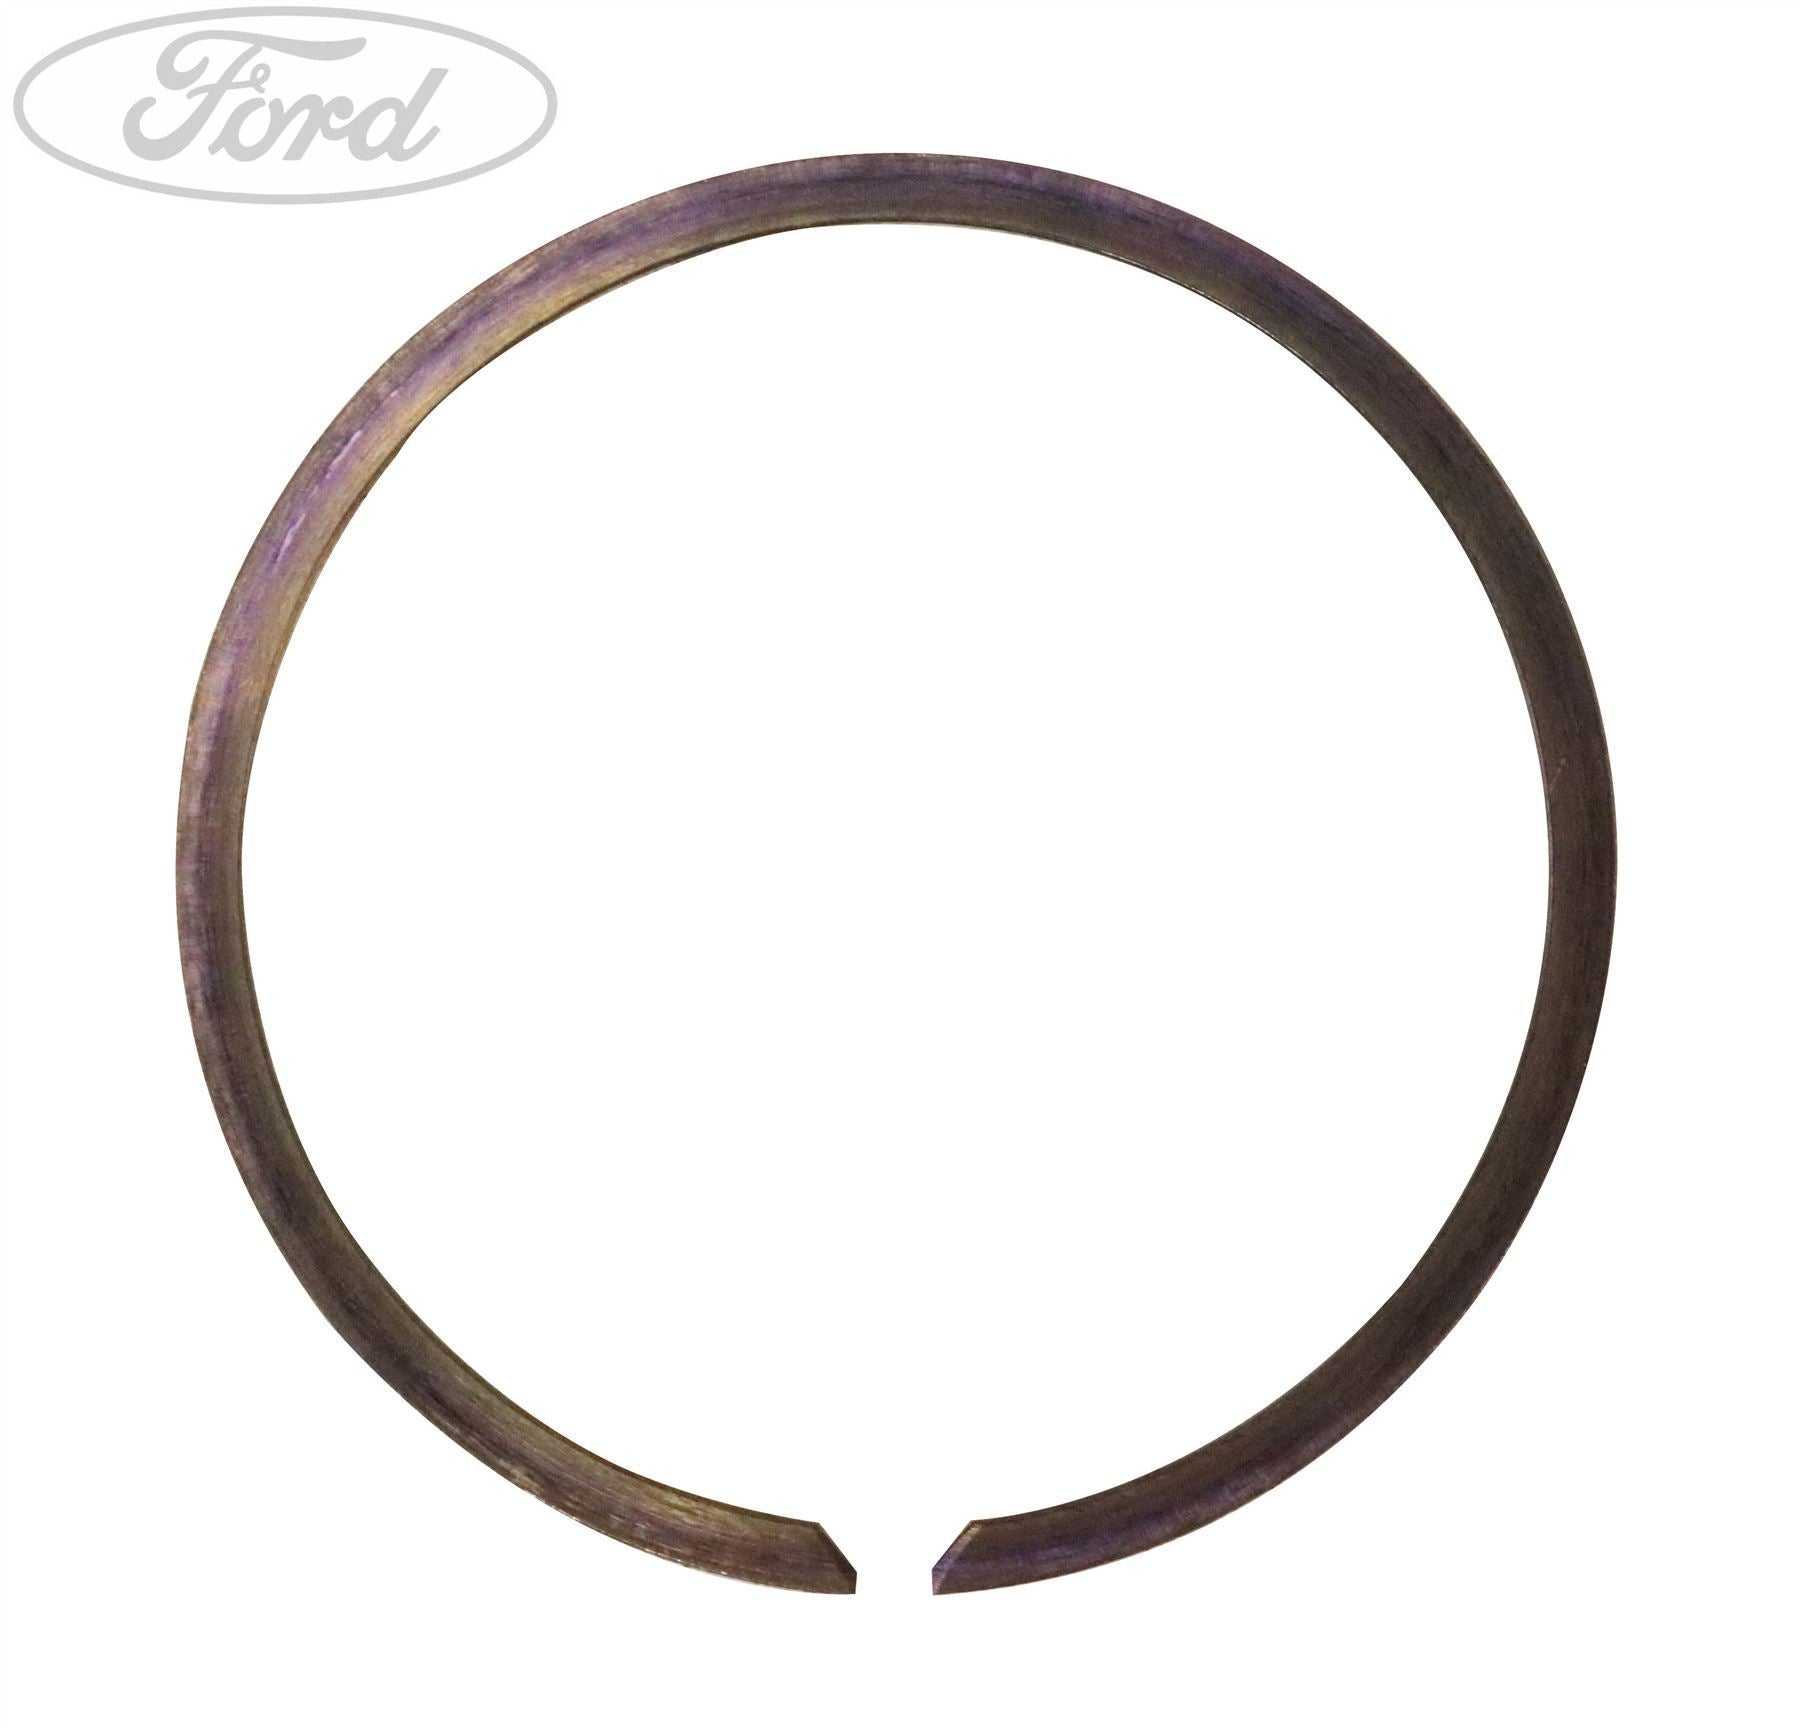 Ford, SPECIAL SNAP RING